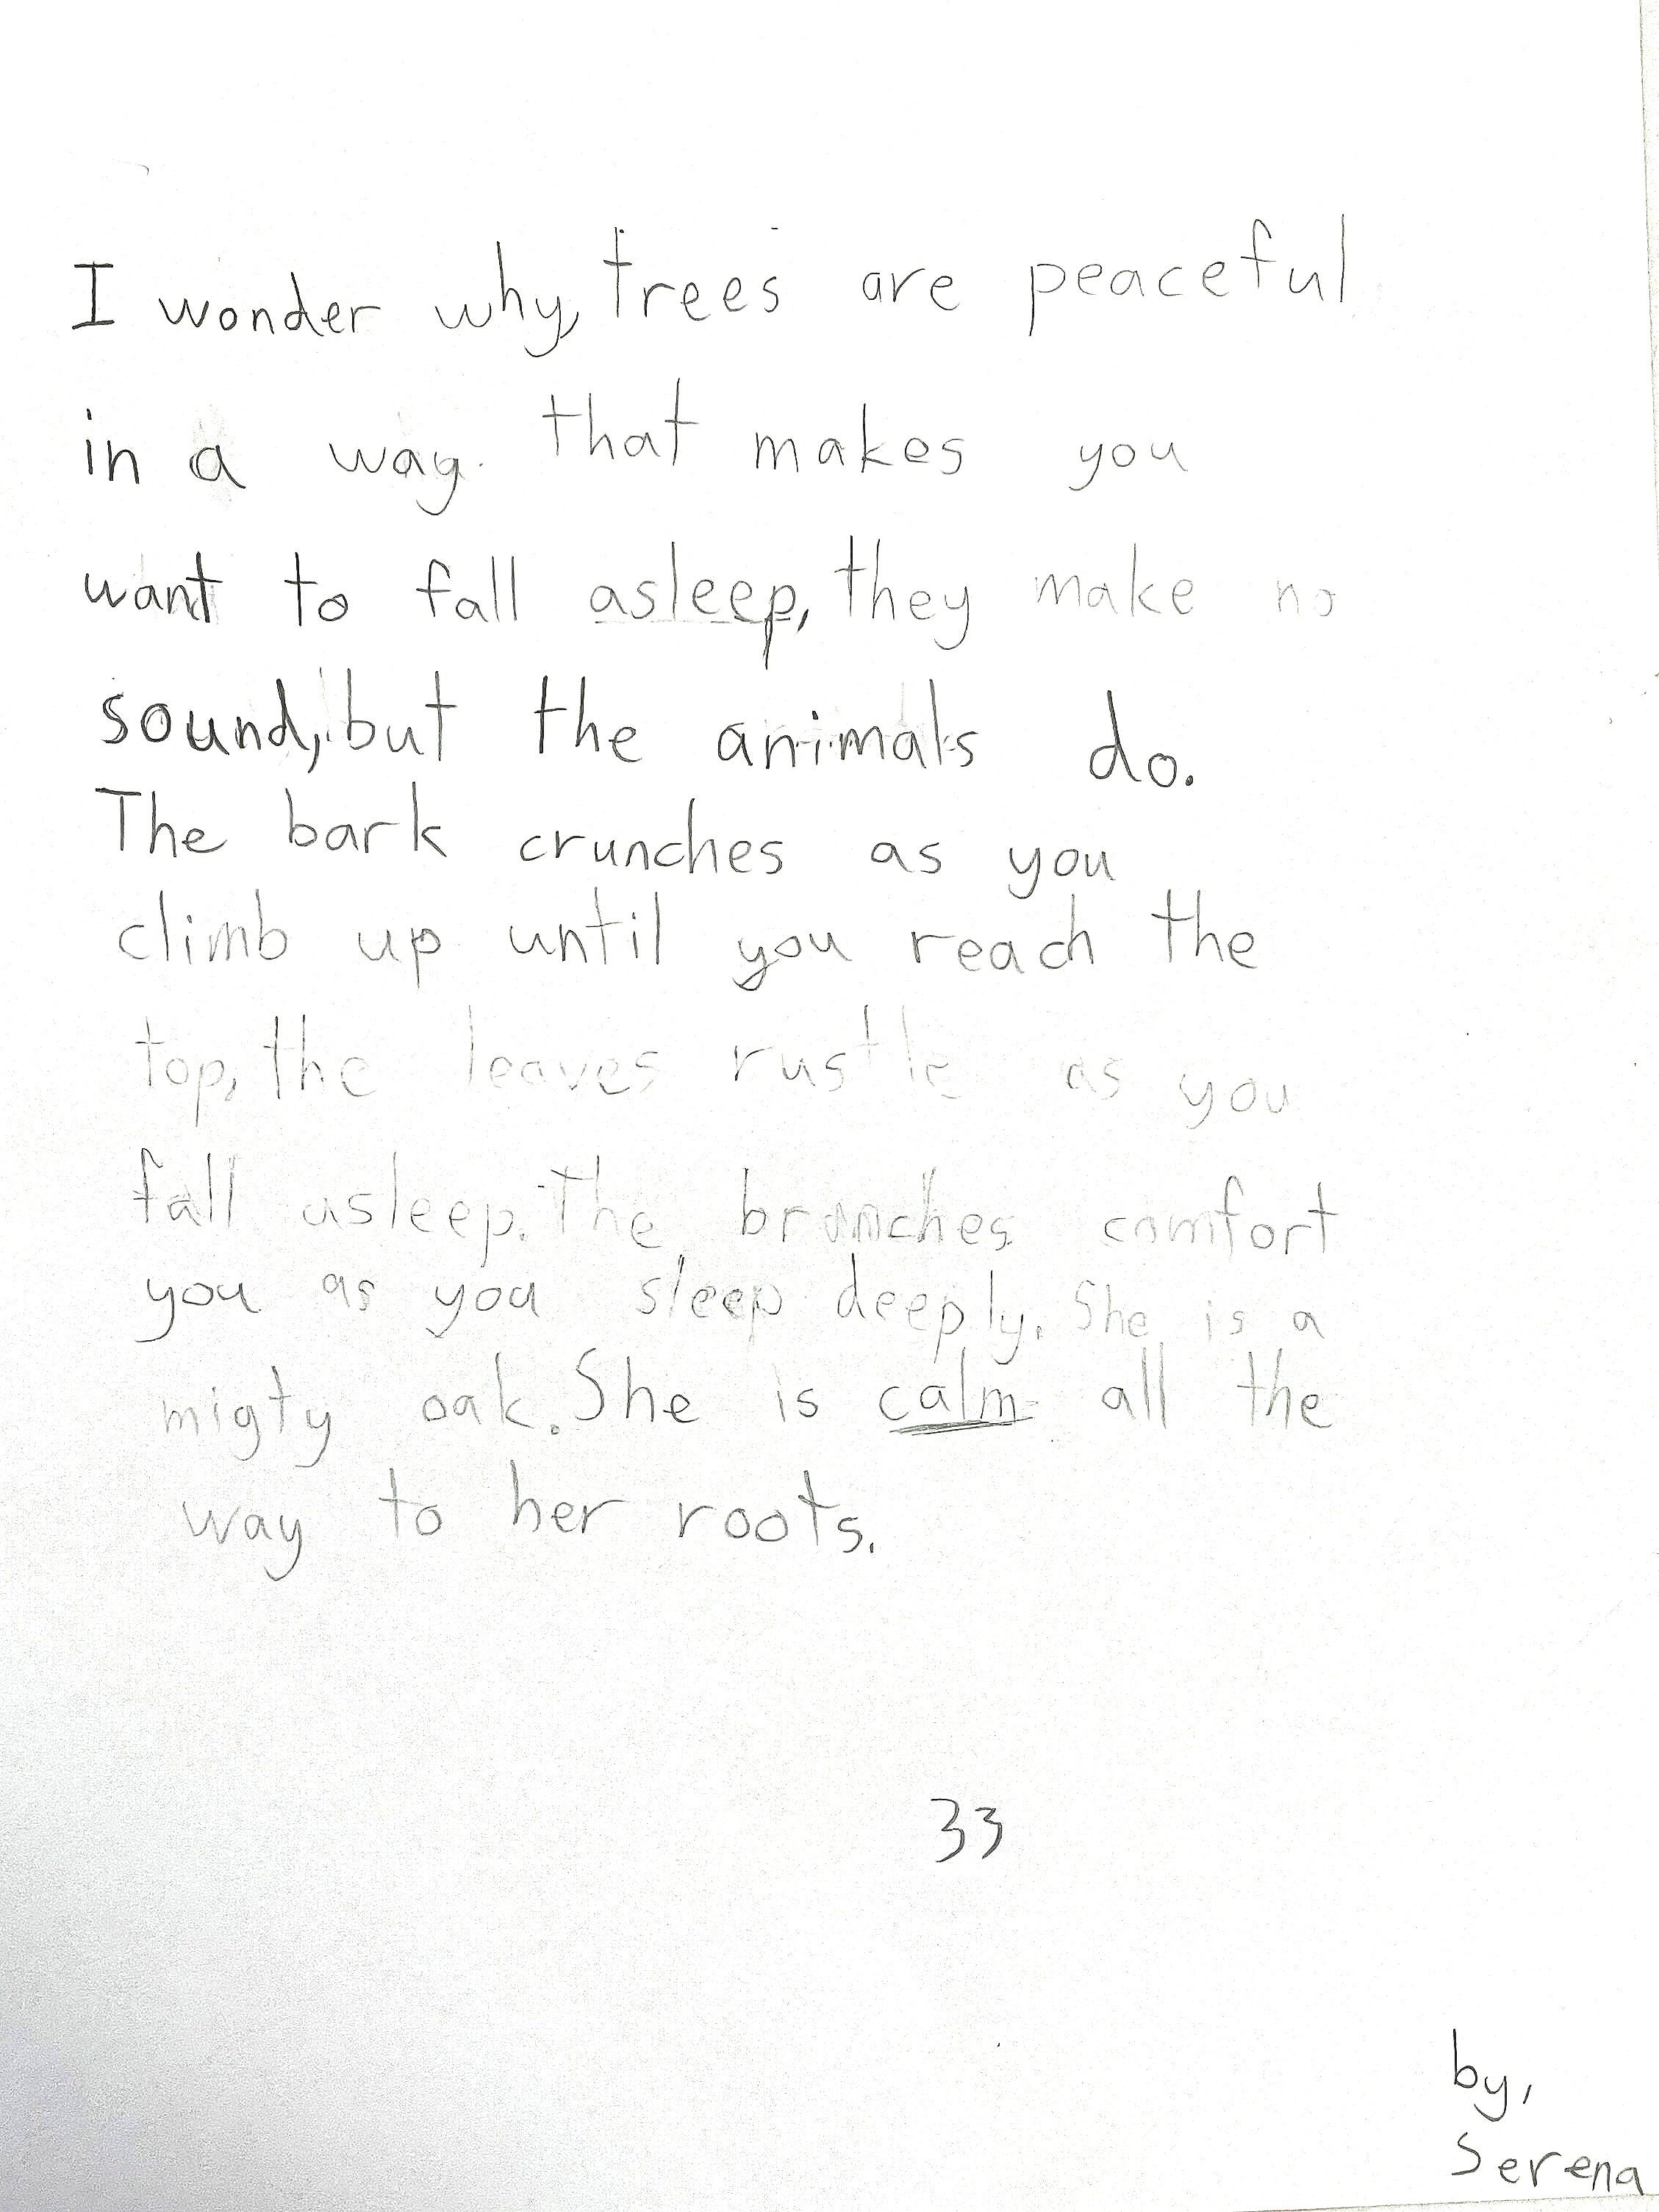 Poem written by Serena, Age 8, Inspired by Jane Olin's Photograph "Intimate Conversation 33"